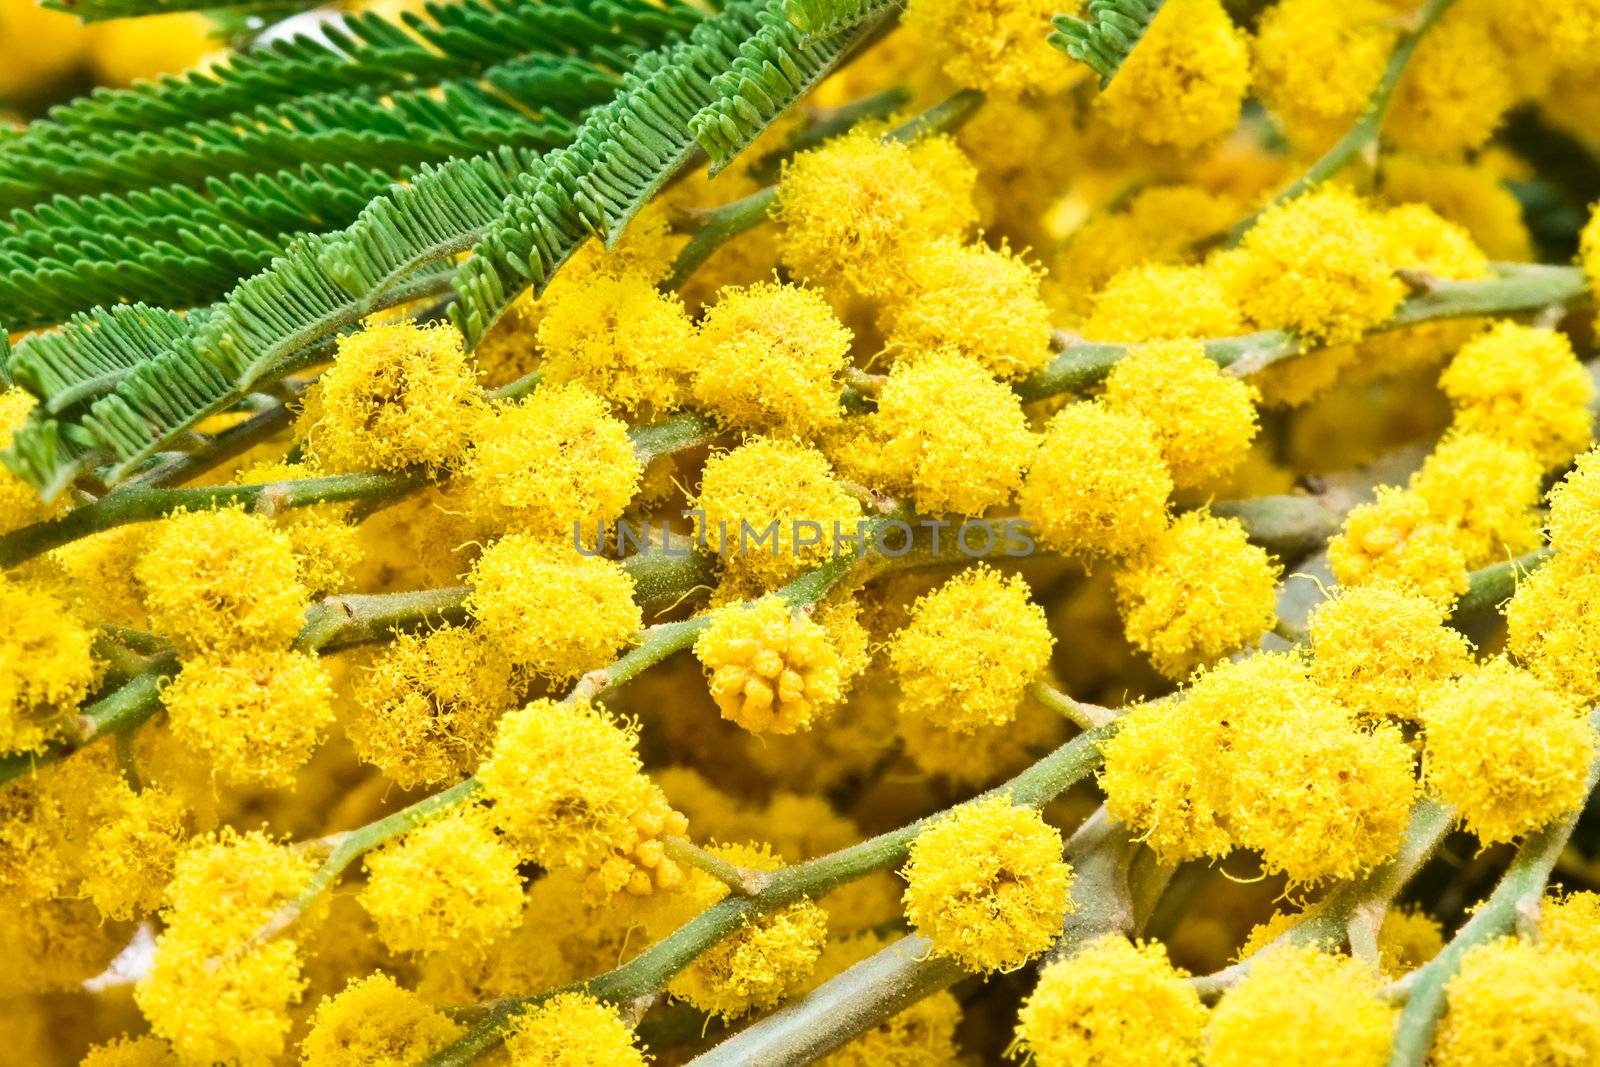 Mimosa background, extreme close up